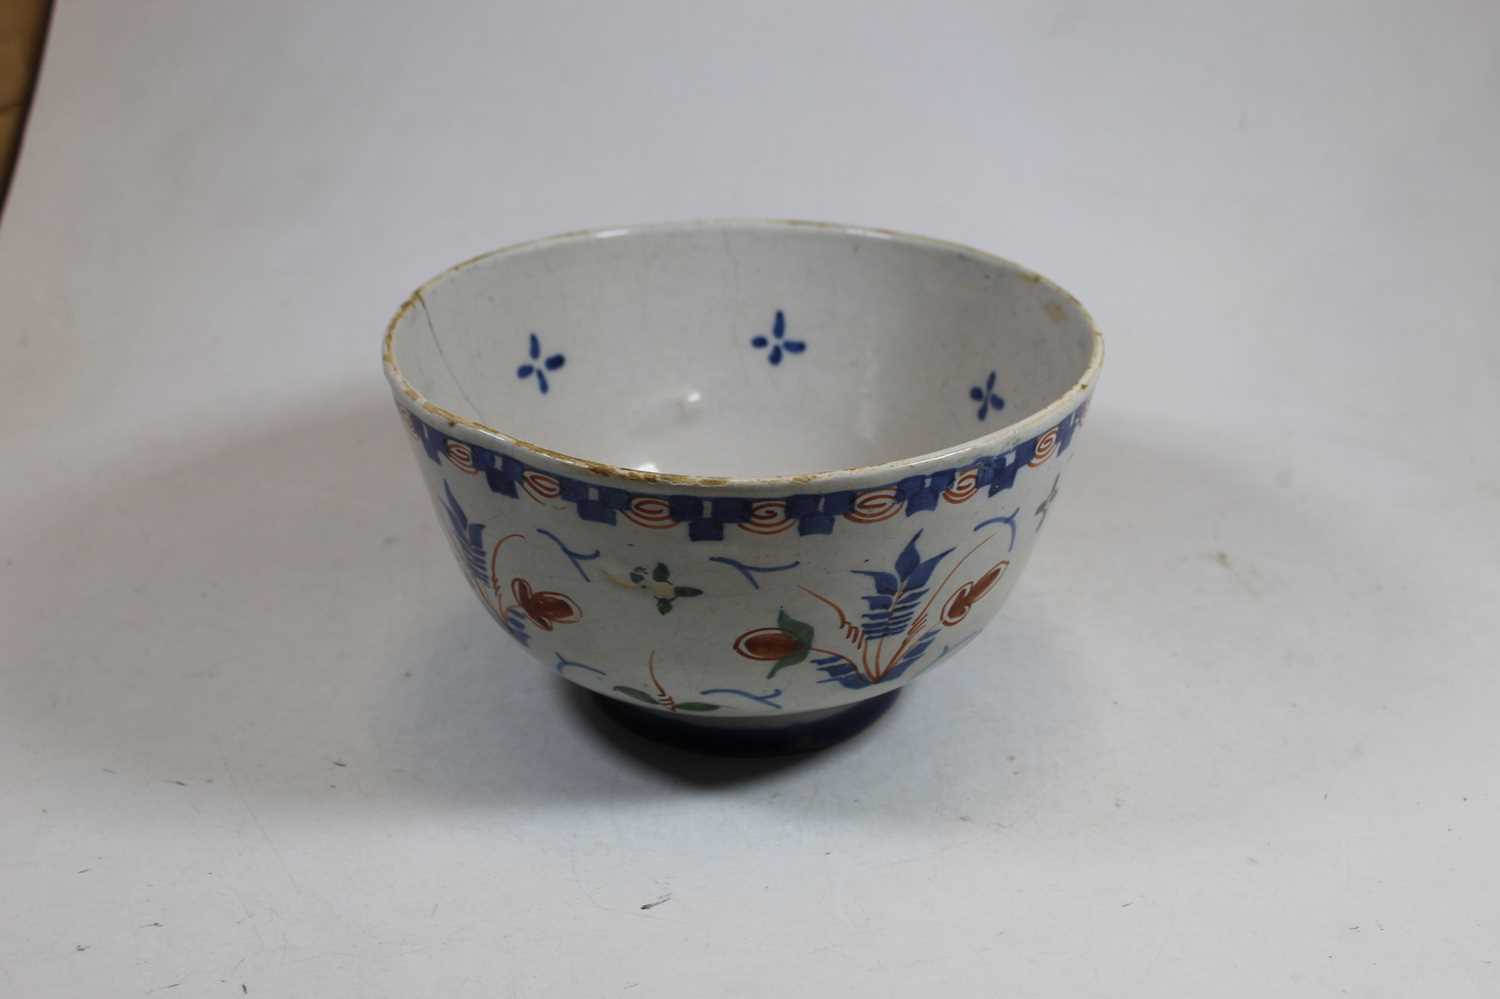 An 18th century English Delft bowl, decorated in shades of blue, brown and green, on circular foot - Image 2 of 3